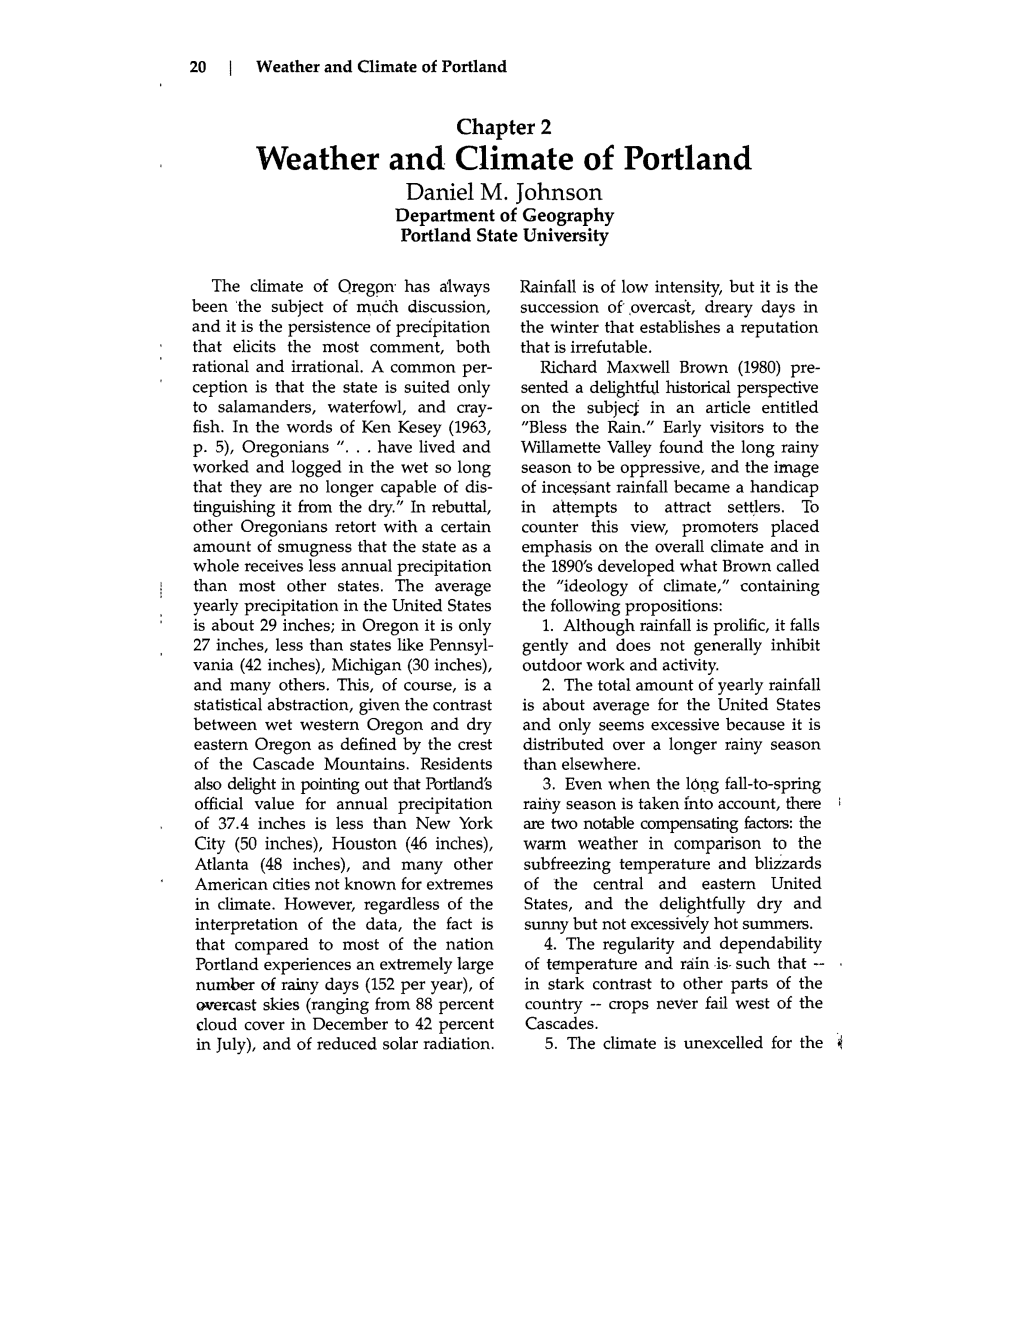 Weather and Climate of Portland